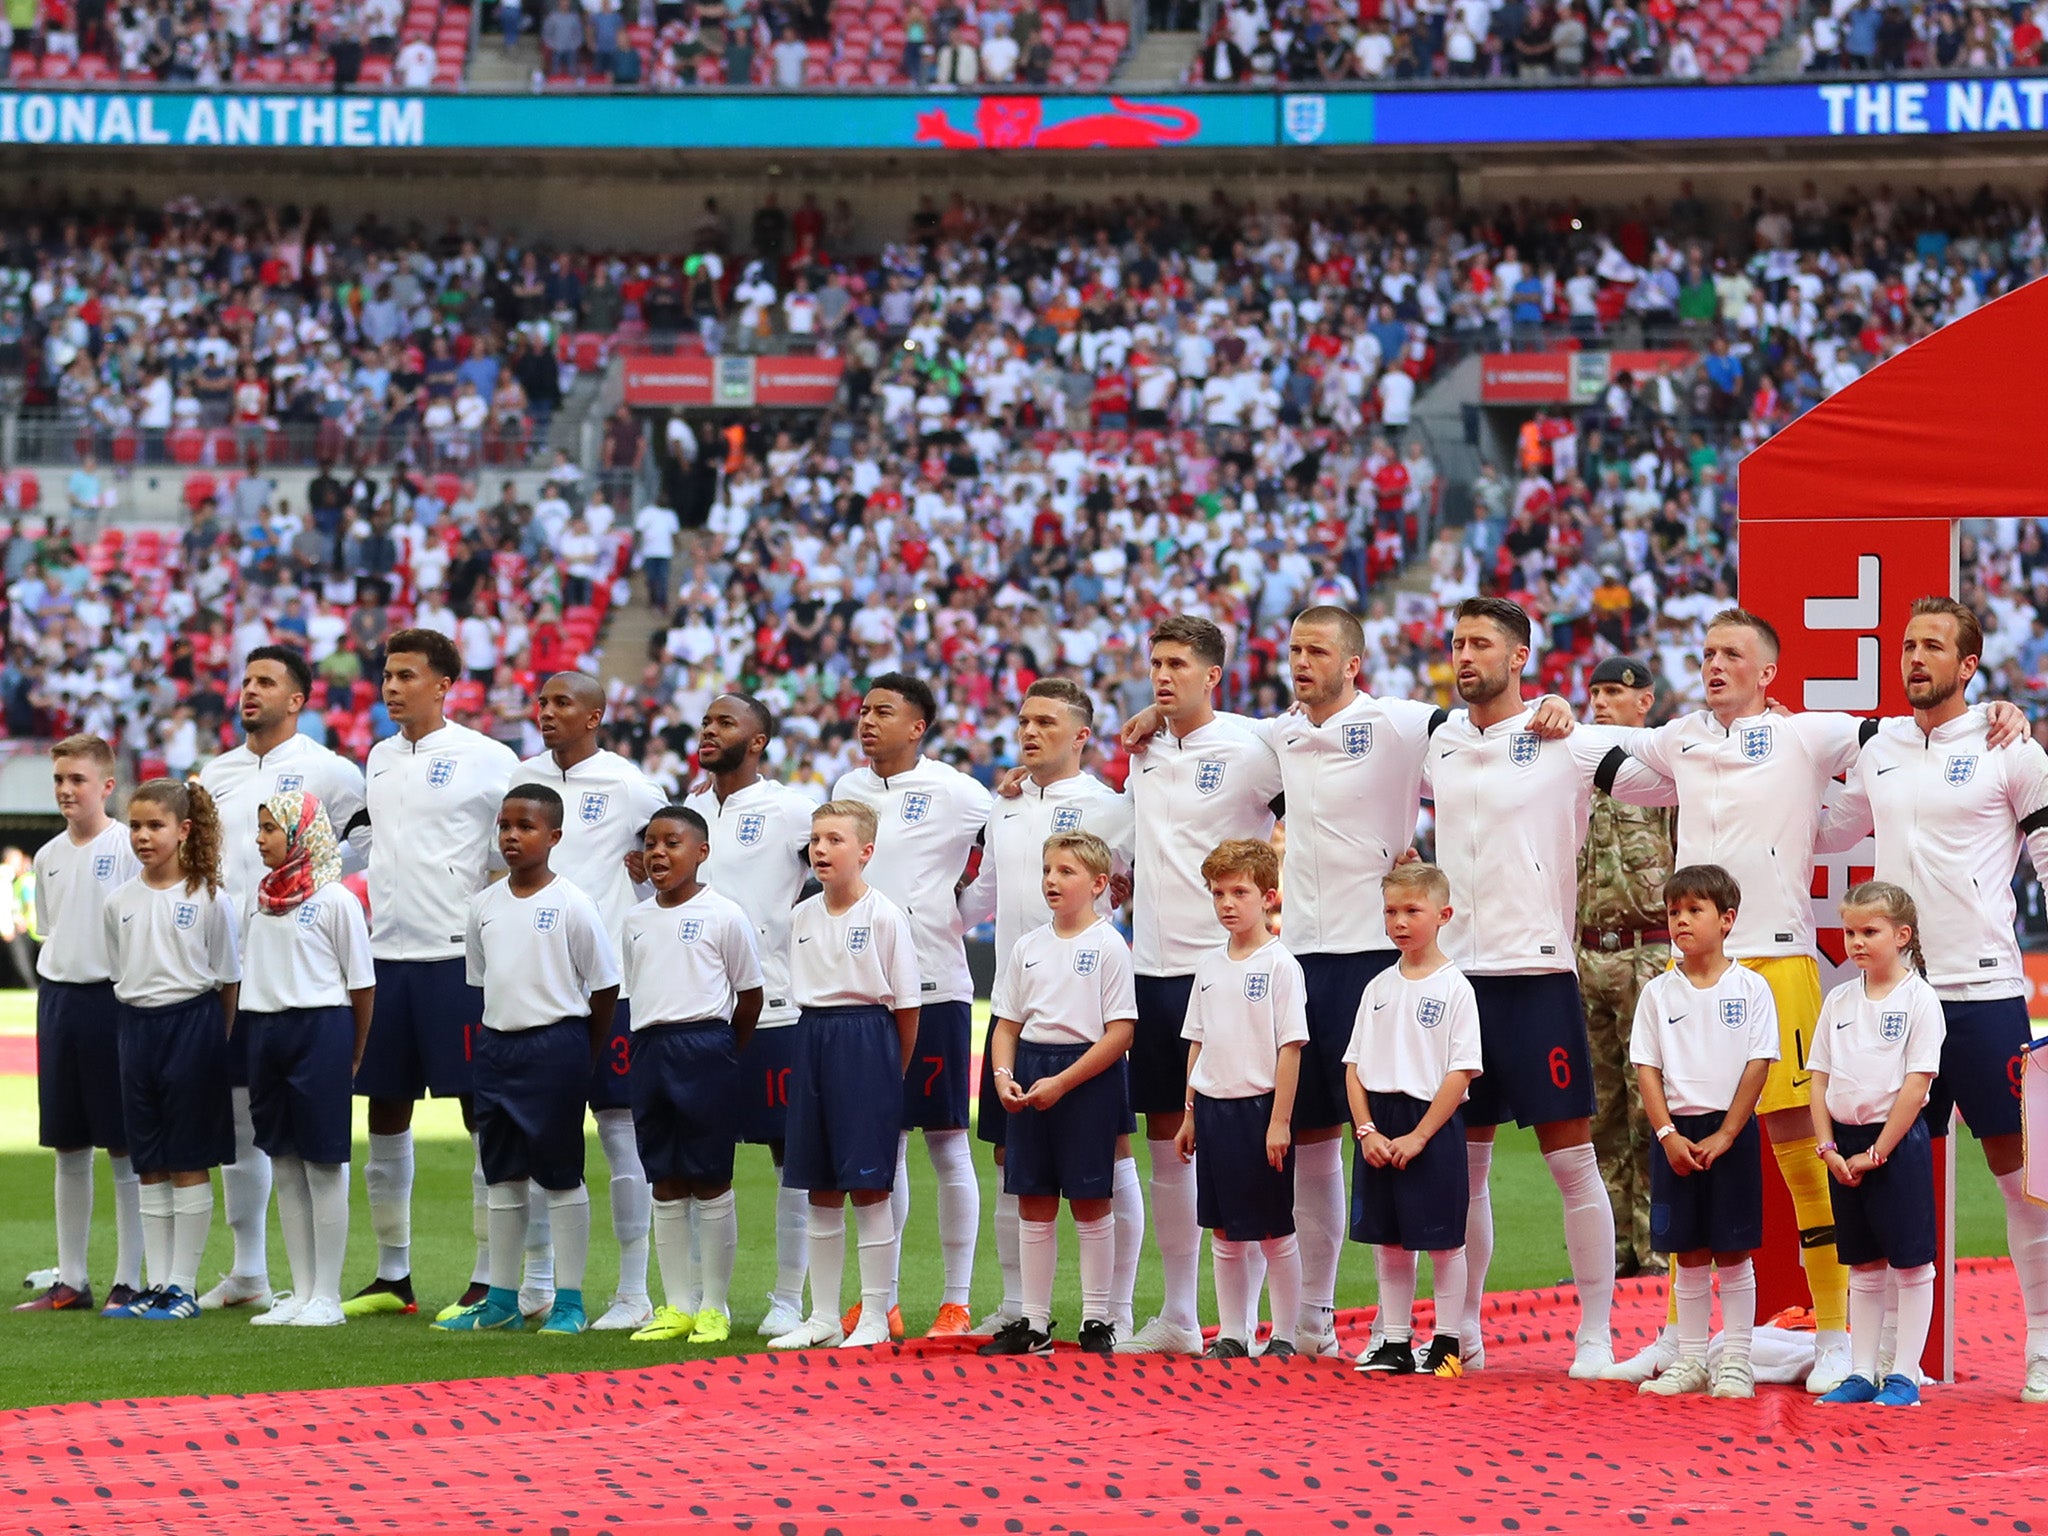 The England team line up before their friendly match against Nigeria at Wembley Stadium